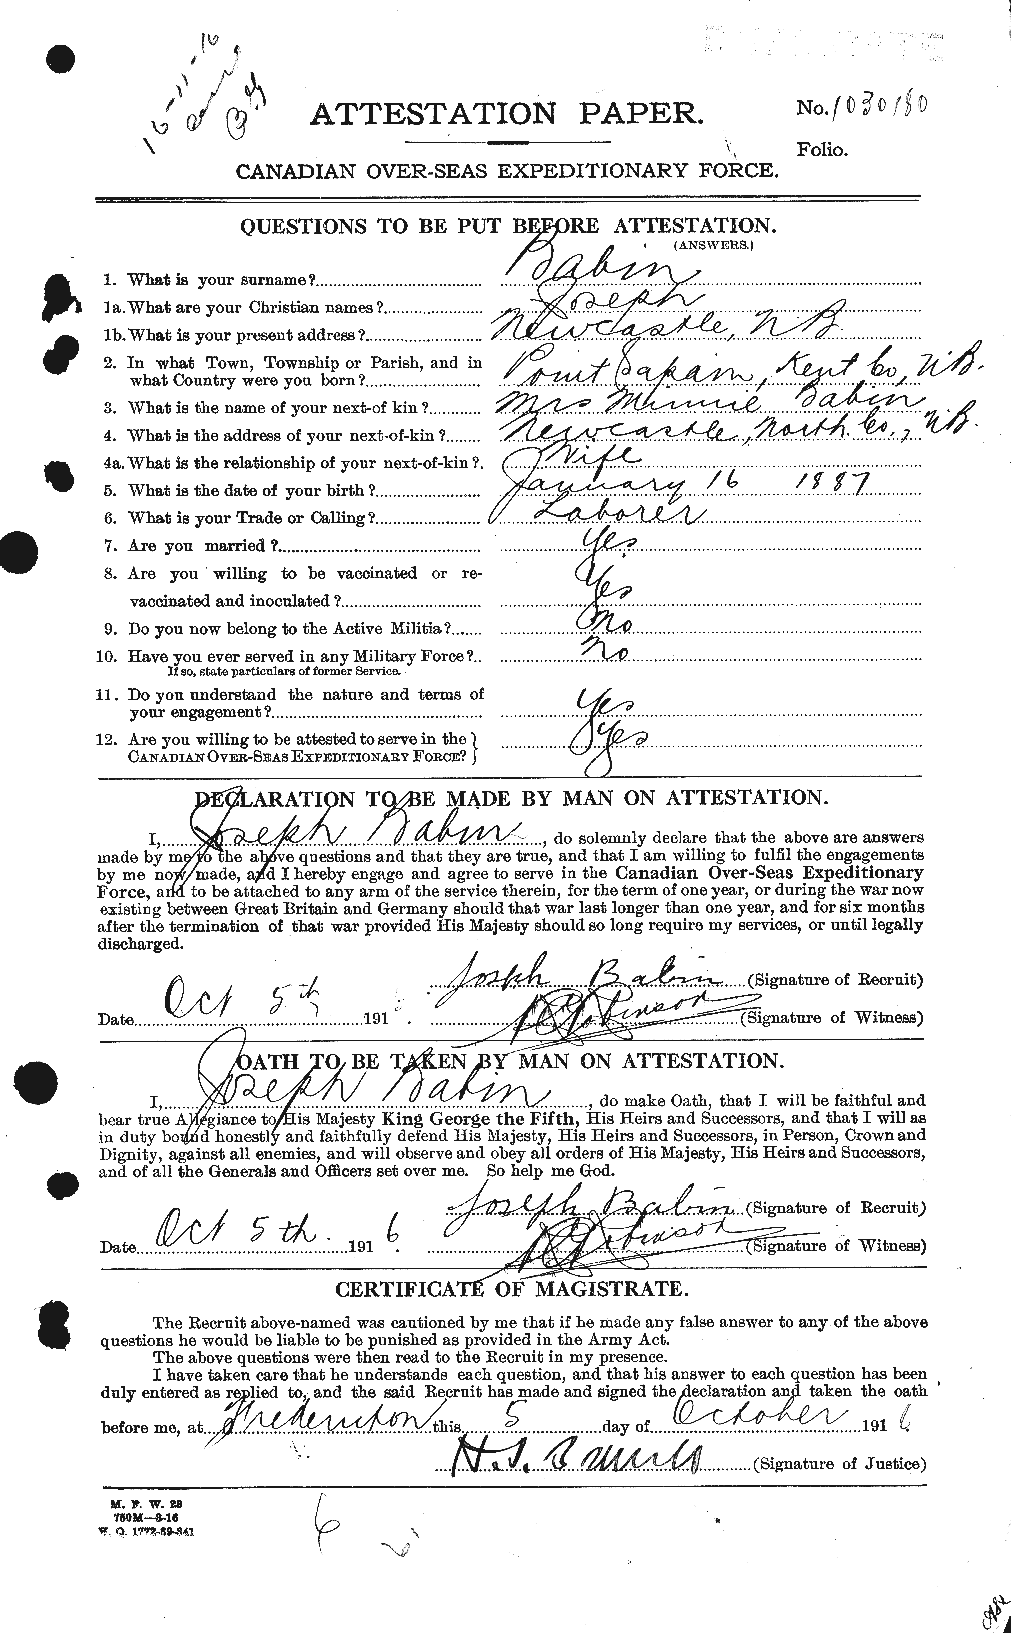 Personnel Records of the First World War - CEF 218139a